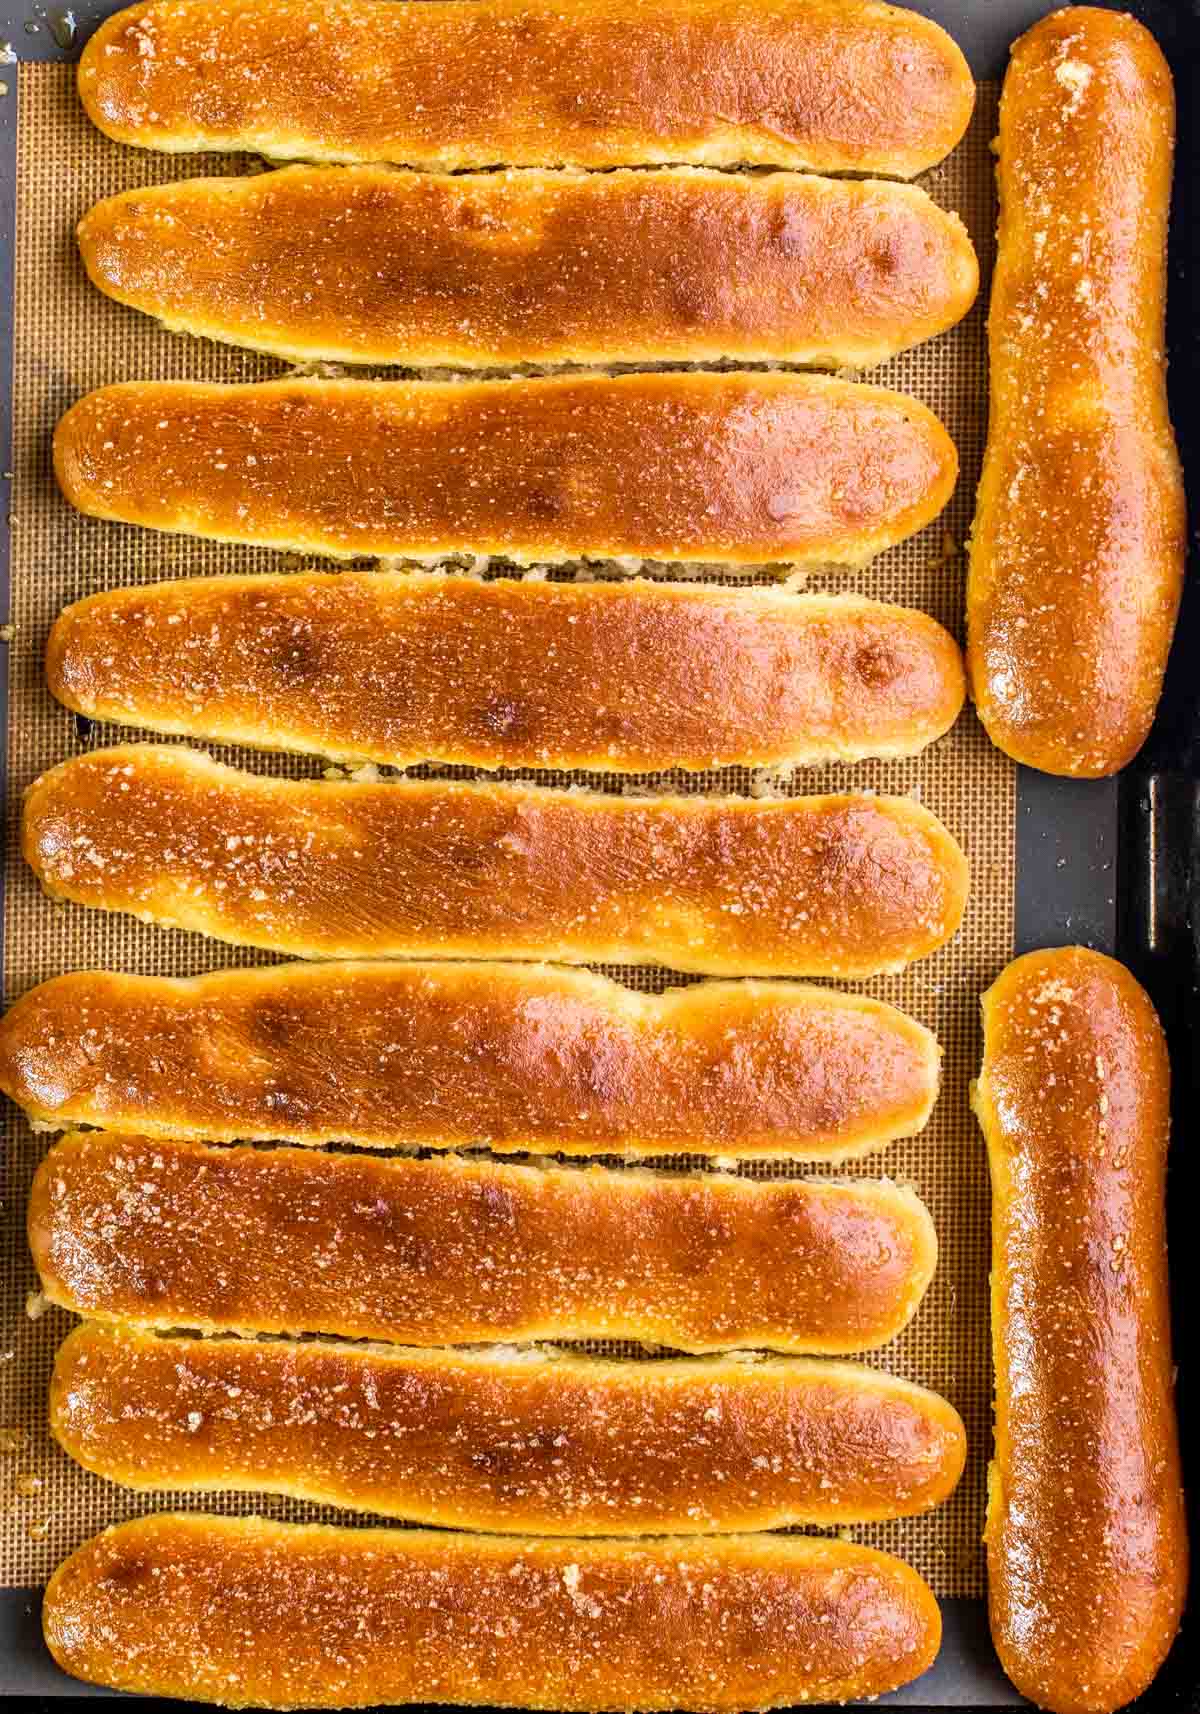 breadsticks on a baking sheet fresh from the oven.